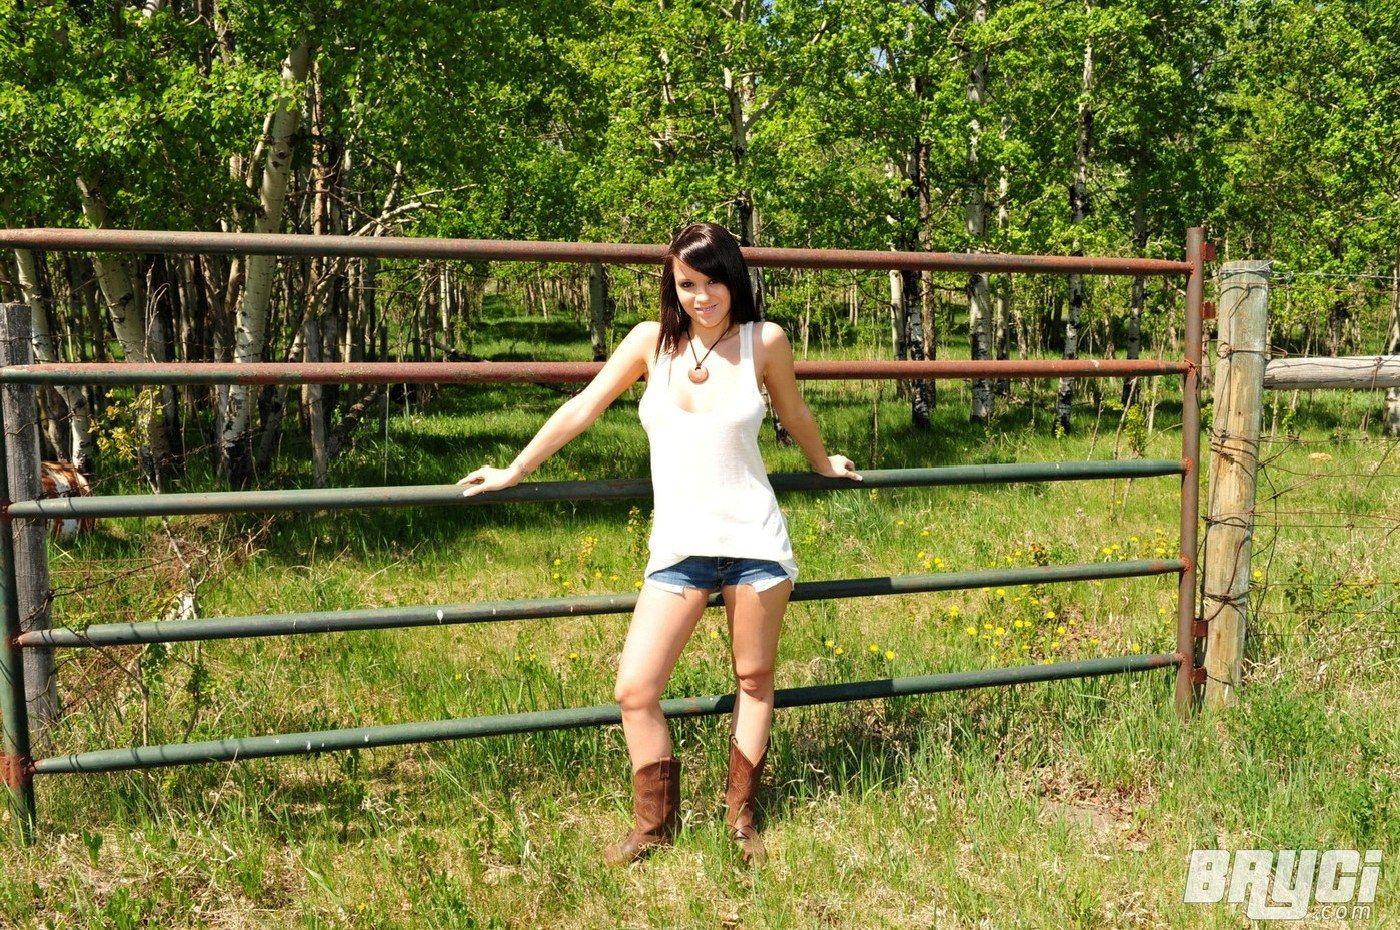 Pictures of Bryci flashing on a farm #53578407